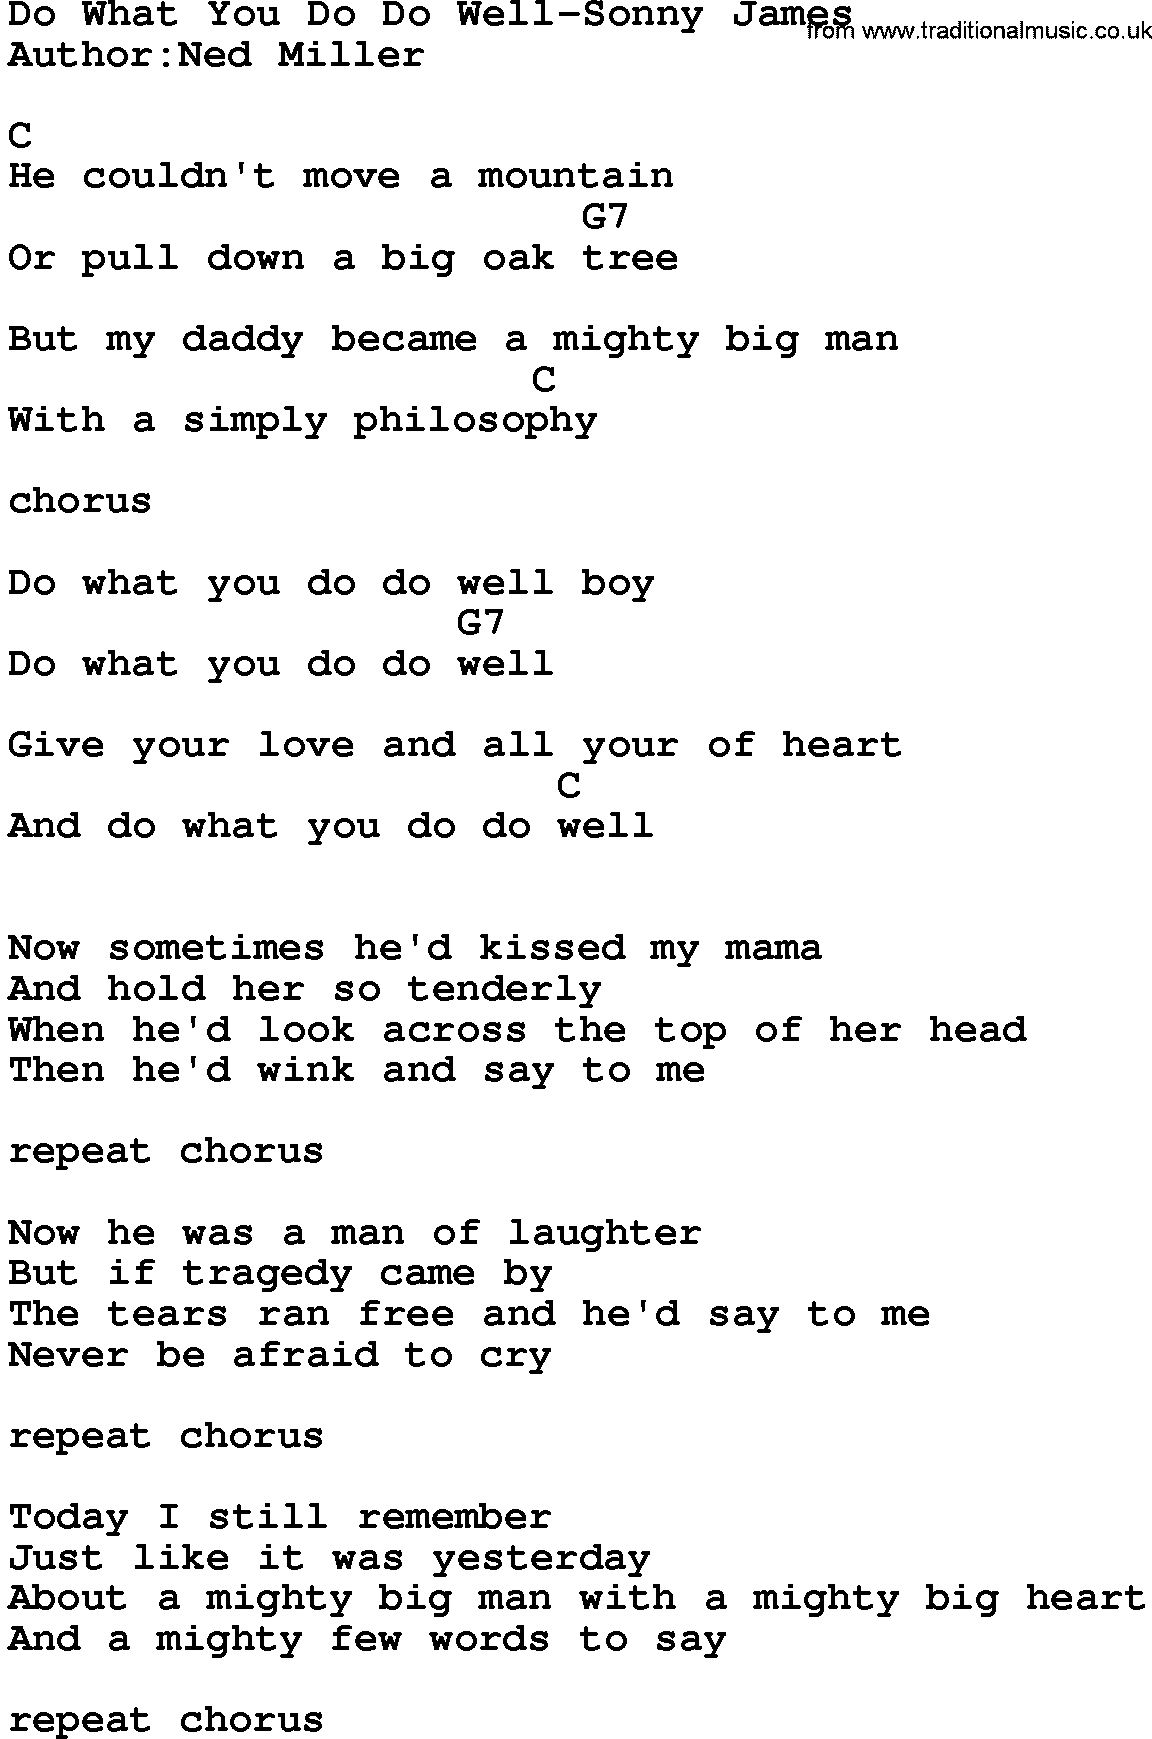 Country music song: Do What You Do Do Well-Sonny James lyrics and chords